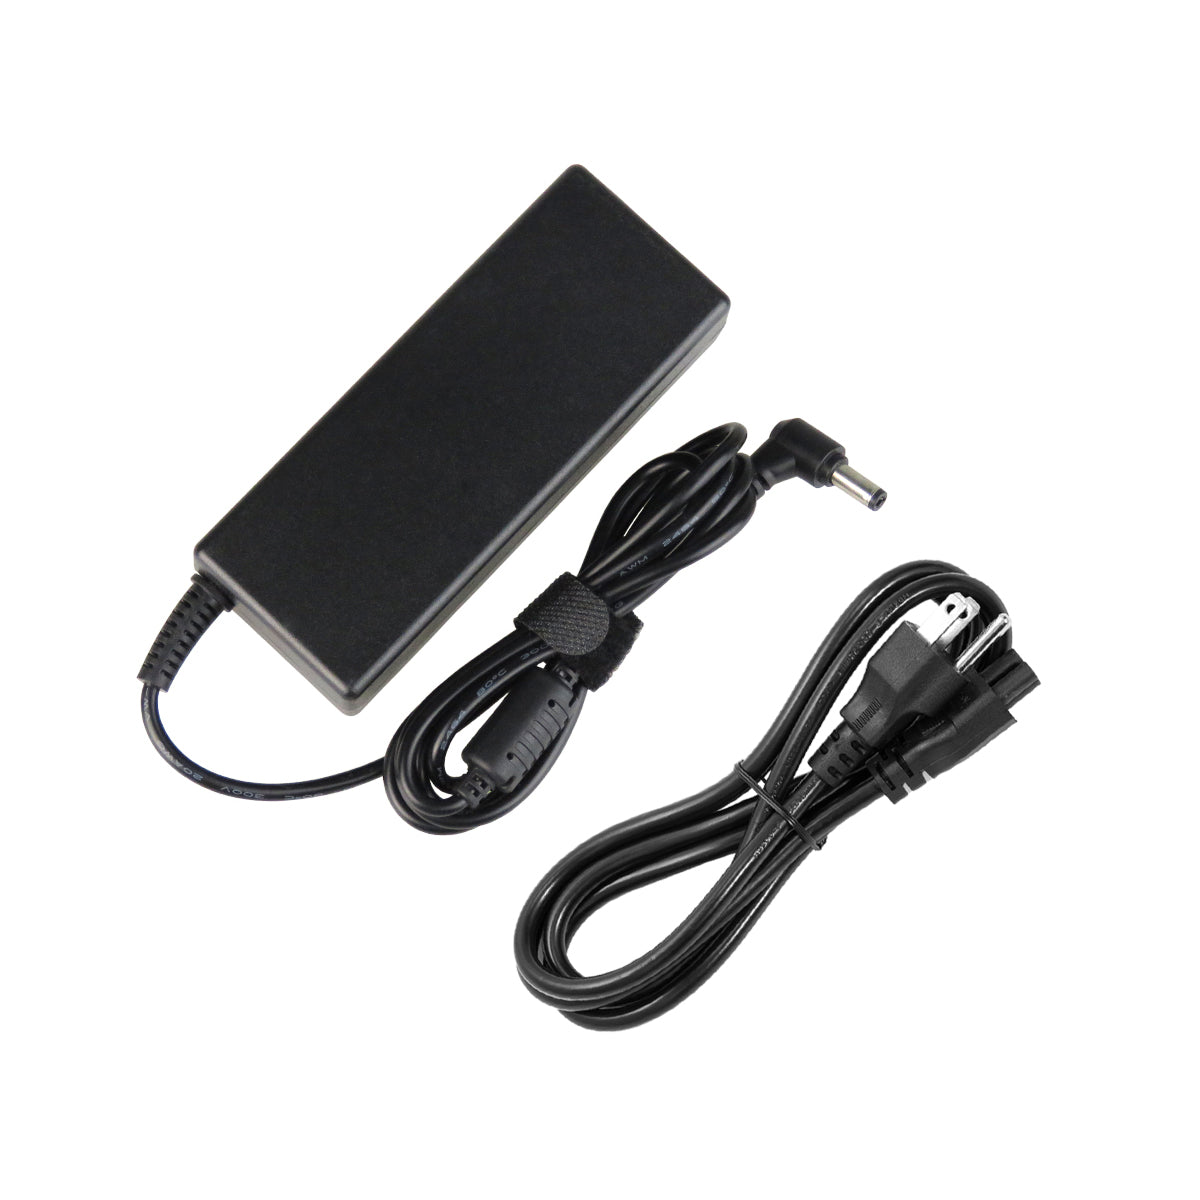 AC Adapter Charger for ASUS A8Jv Notebook.